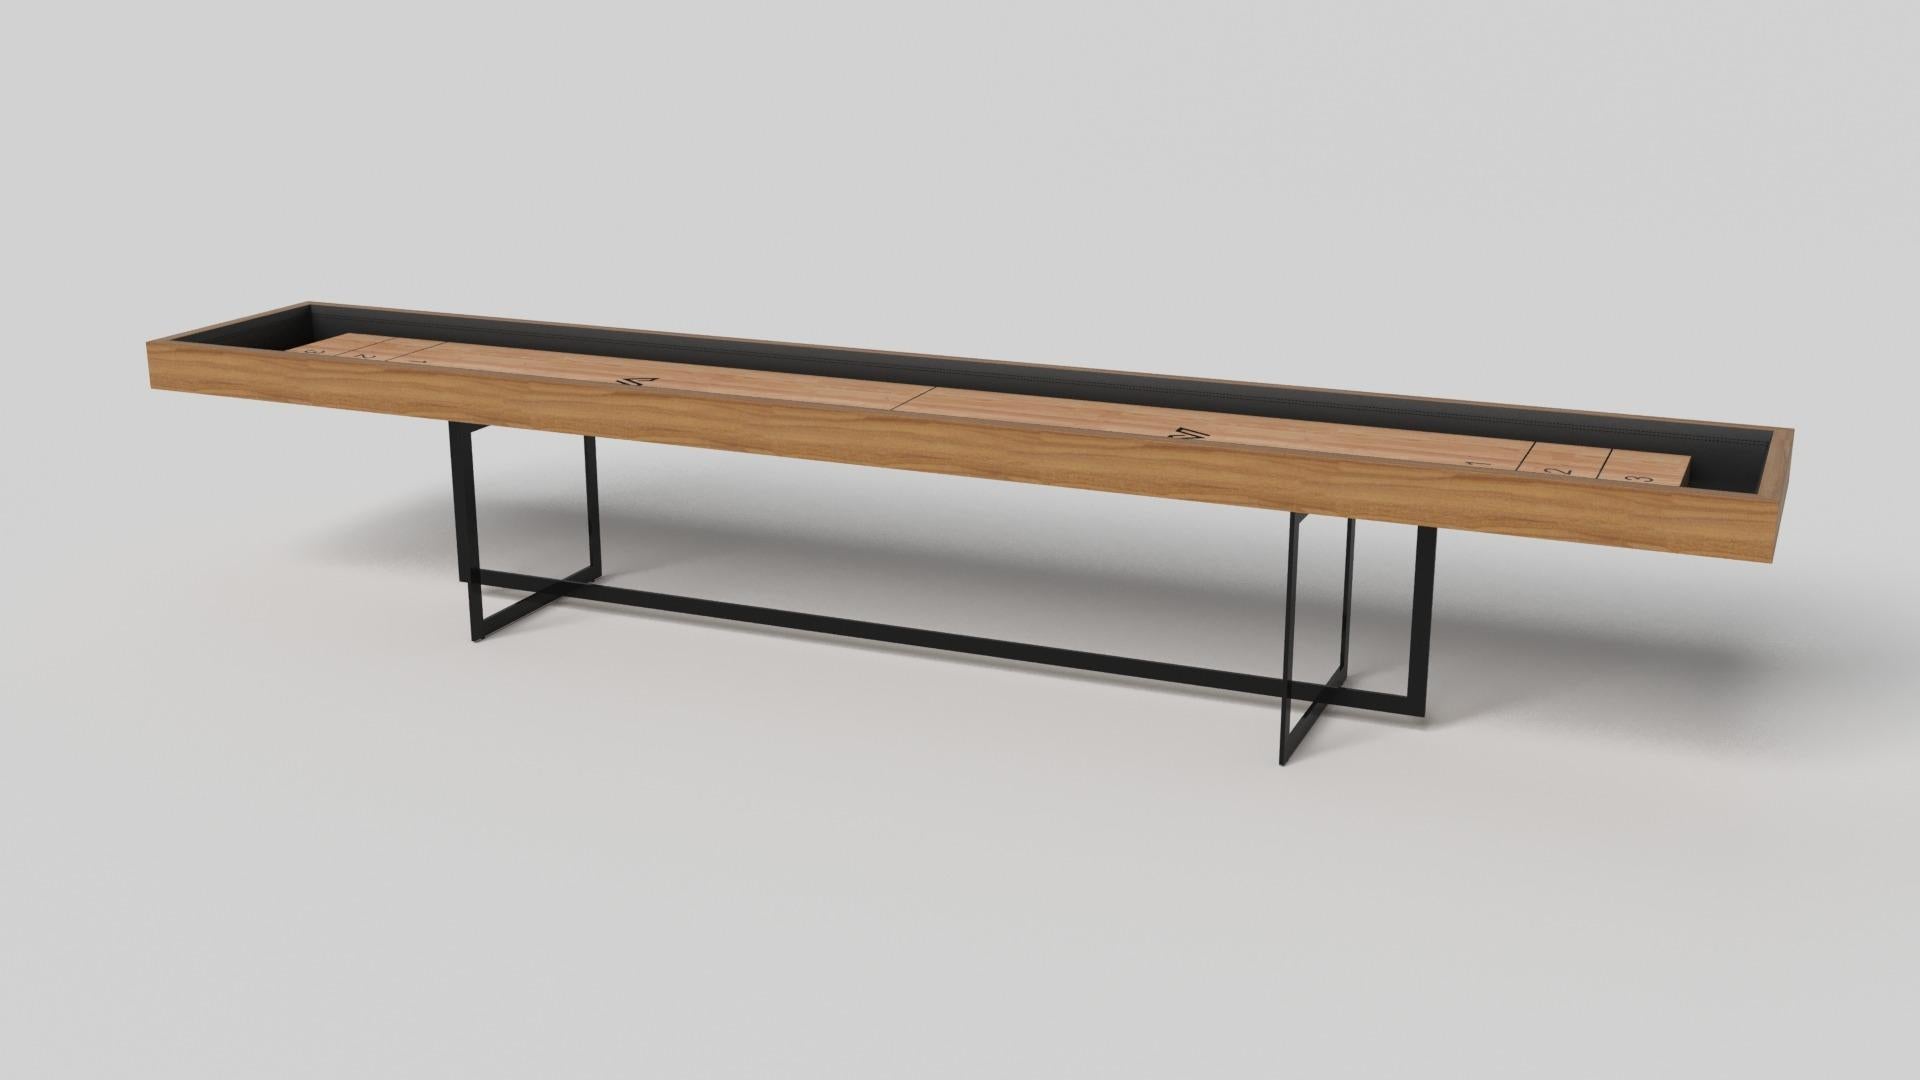 With an open metal foundation, our Beso table is a unique expression of contemporary forms and negative space. This shuffleboard table is handcrafted by our master artisans with a rectangle-in-rectangle base that echoes the angles and edges of a